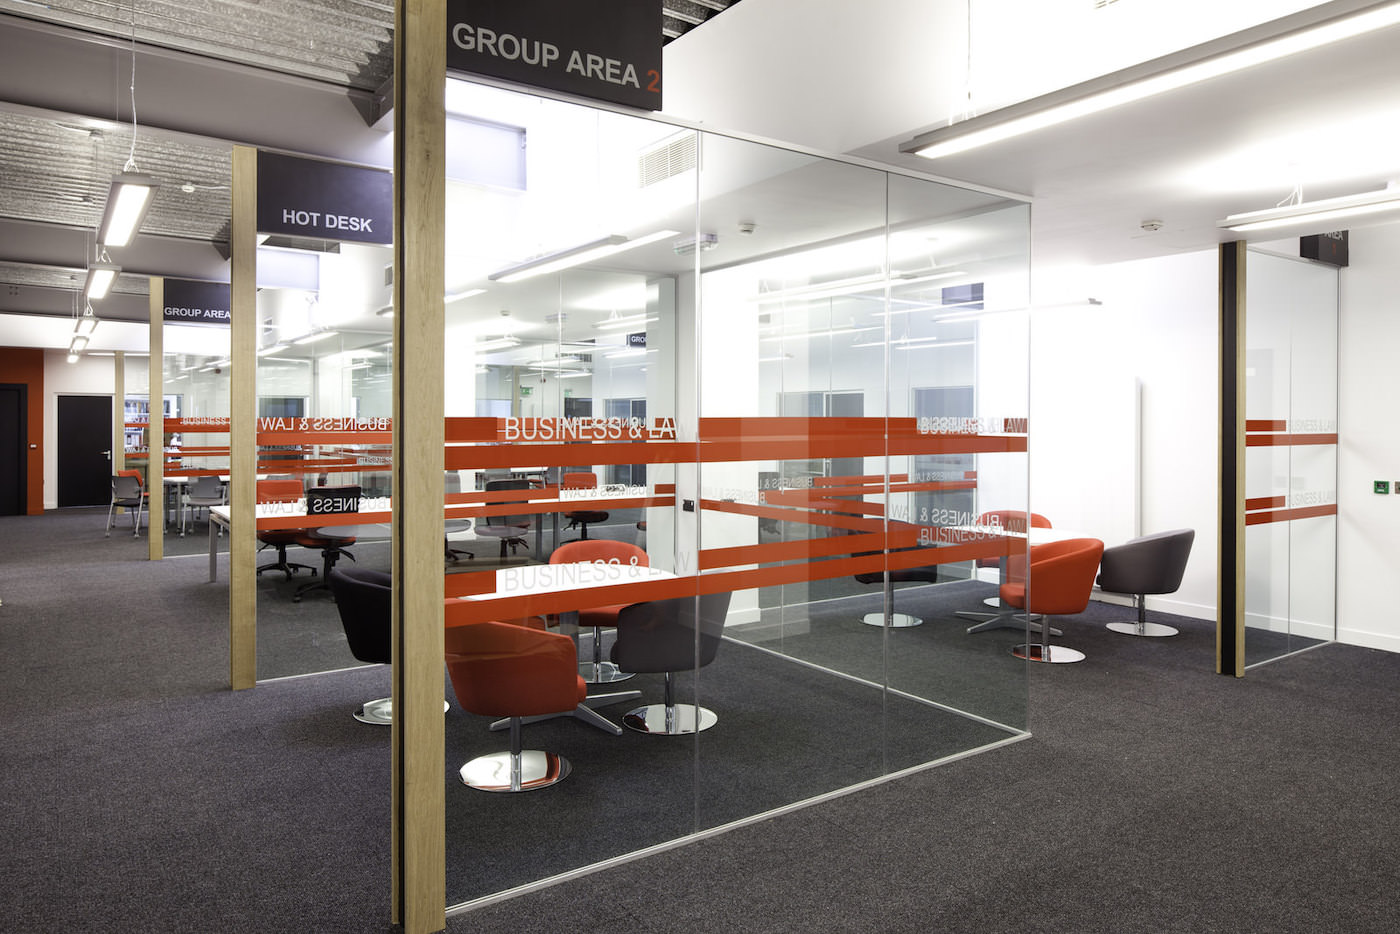 group areas and hot desks of the david chiddick building of the business and law university of lincoln